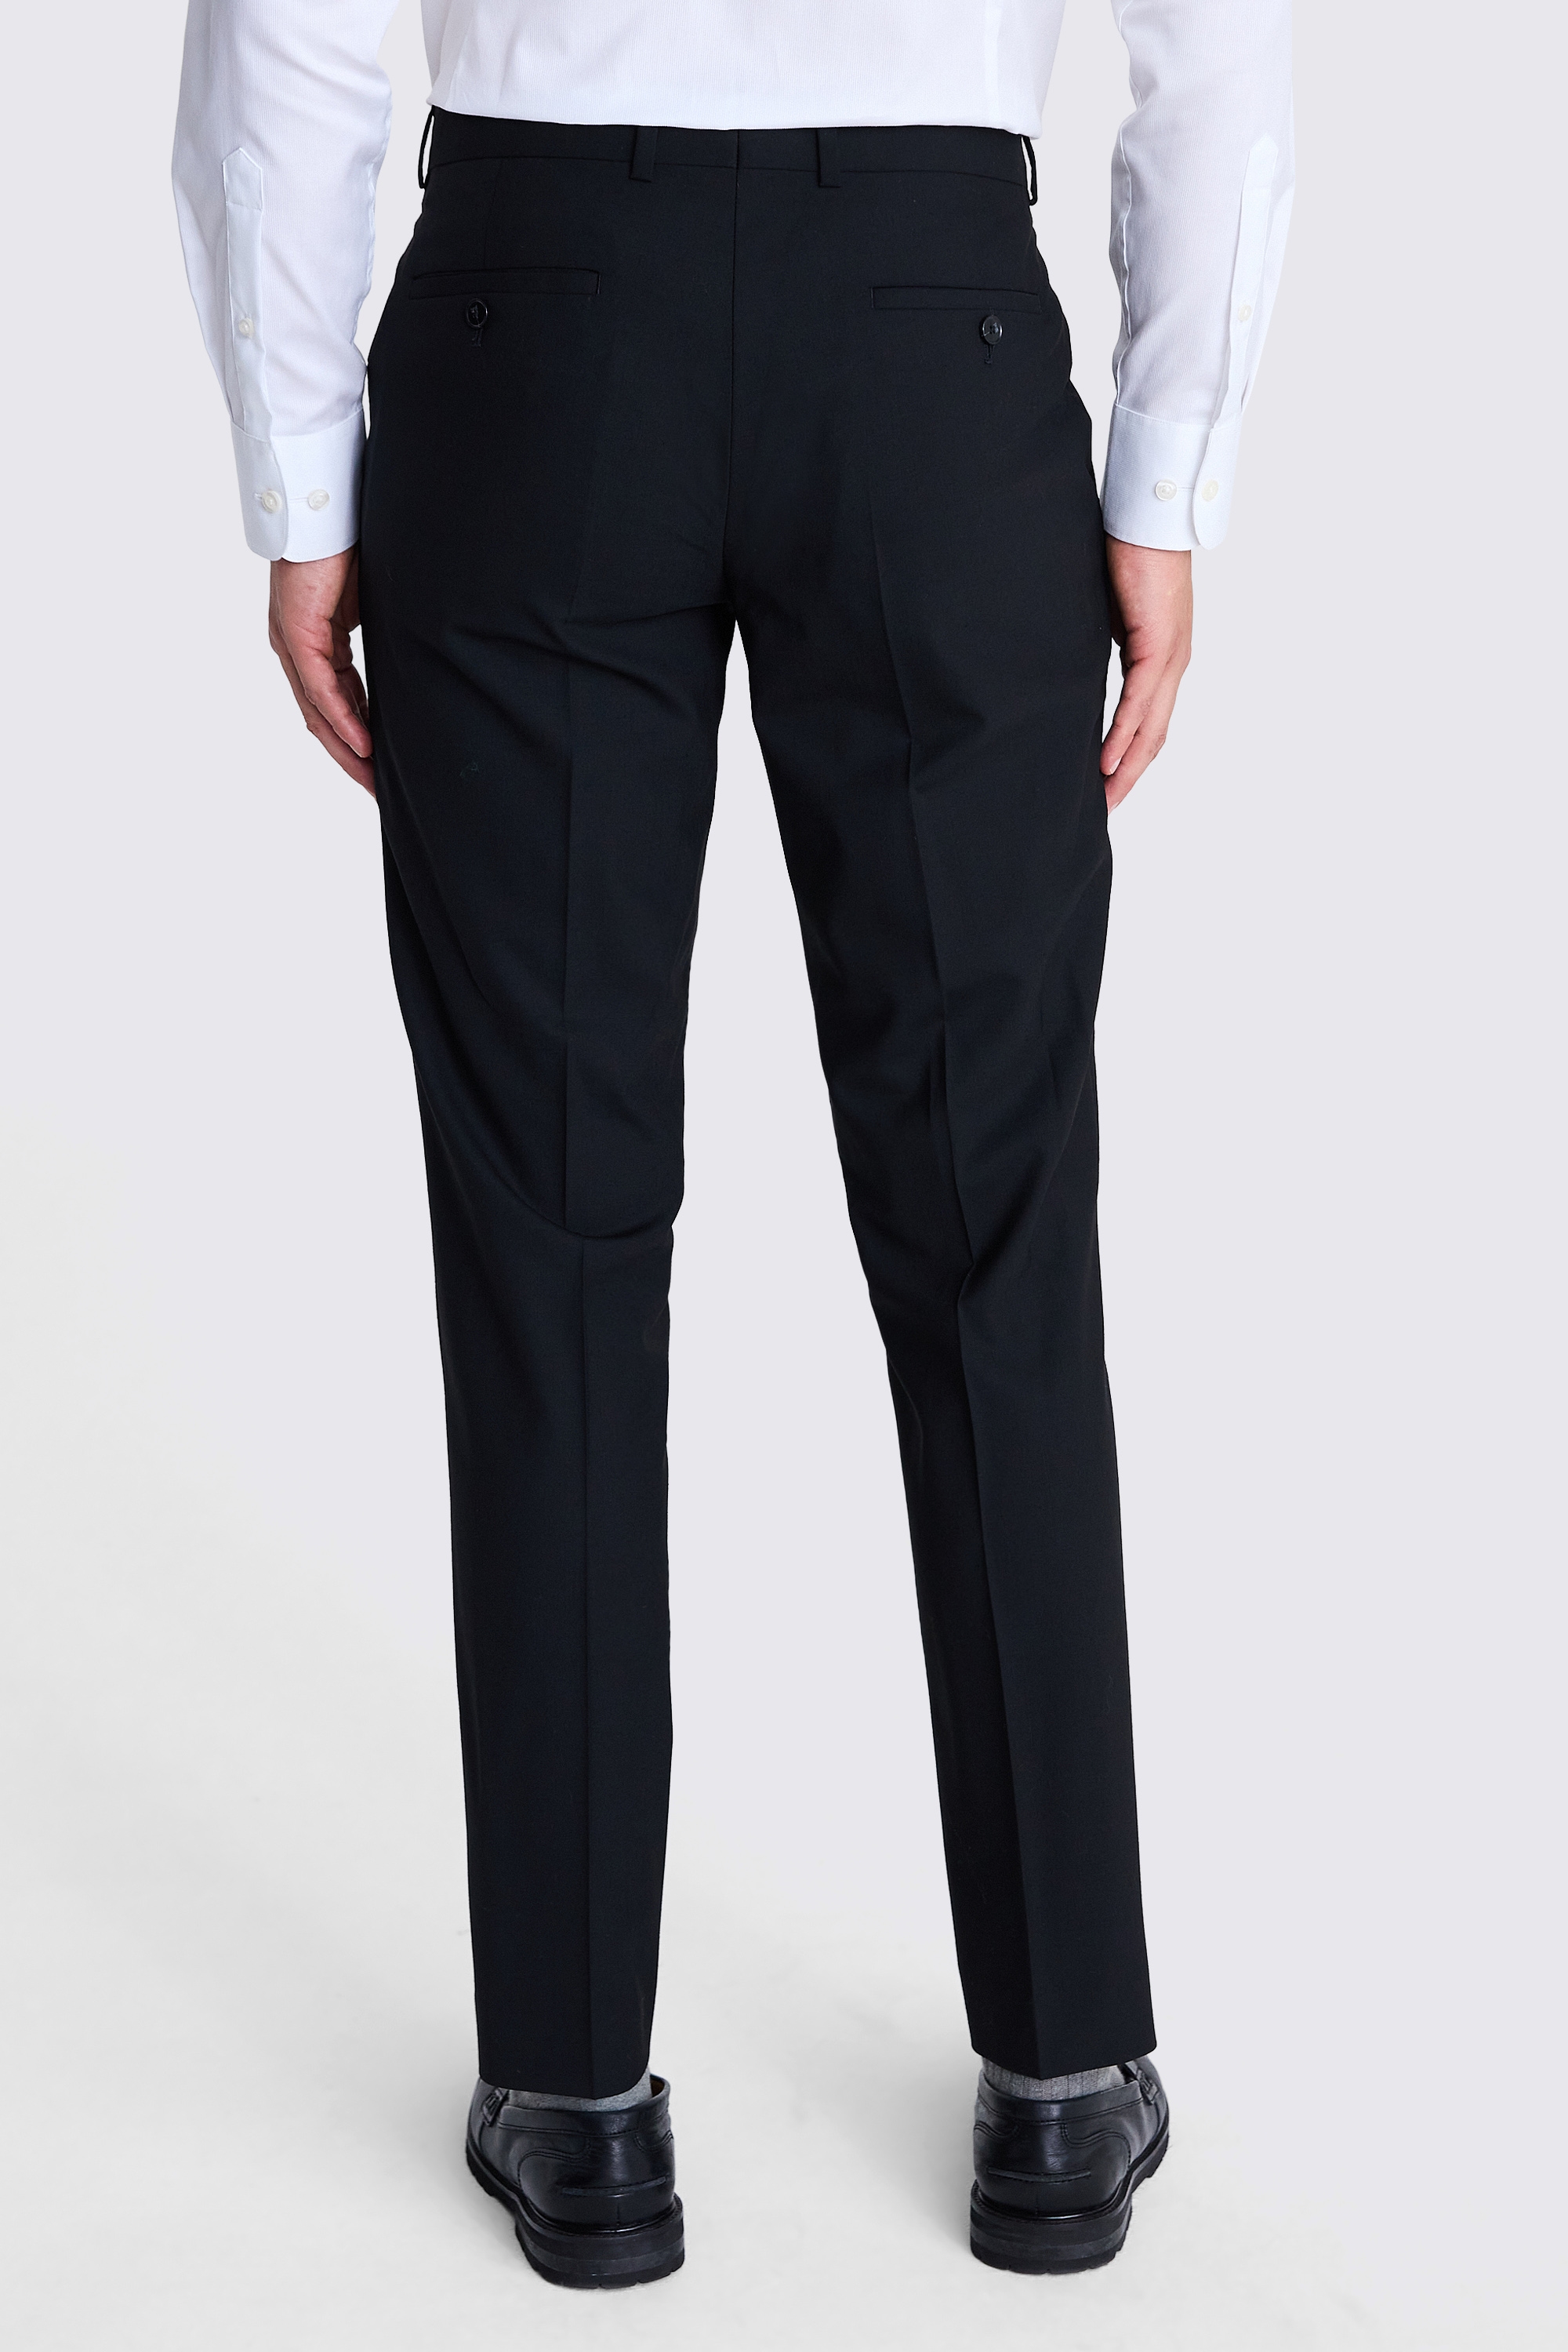 DKNY Slim Fit Black Trousers | Buy Online at Moss